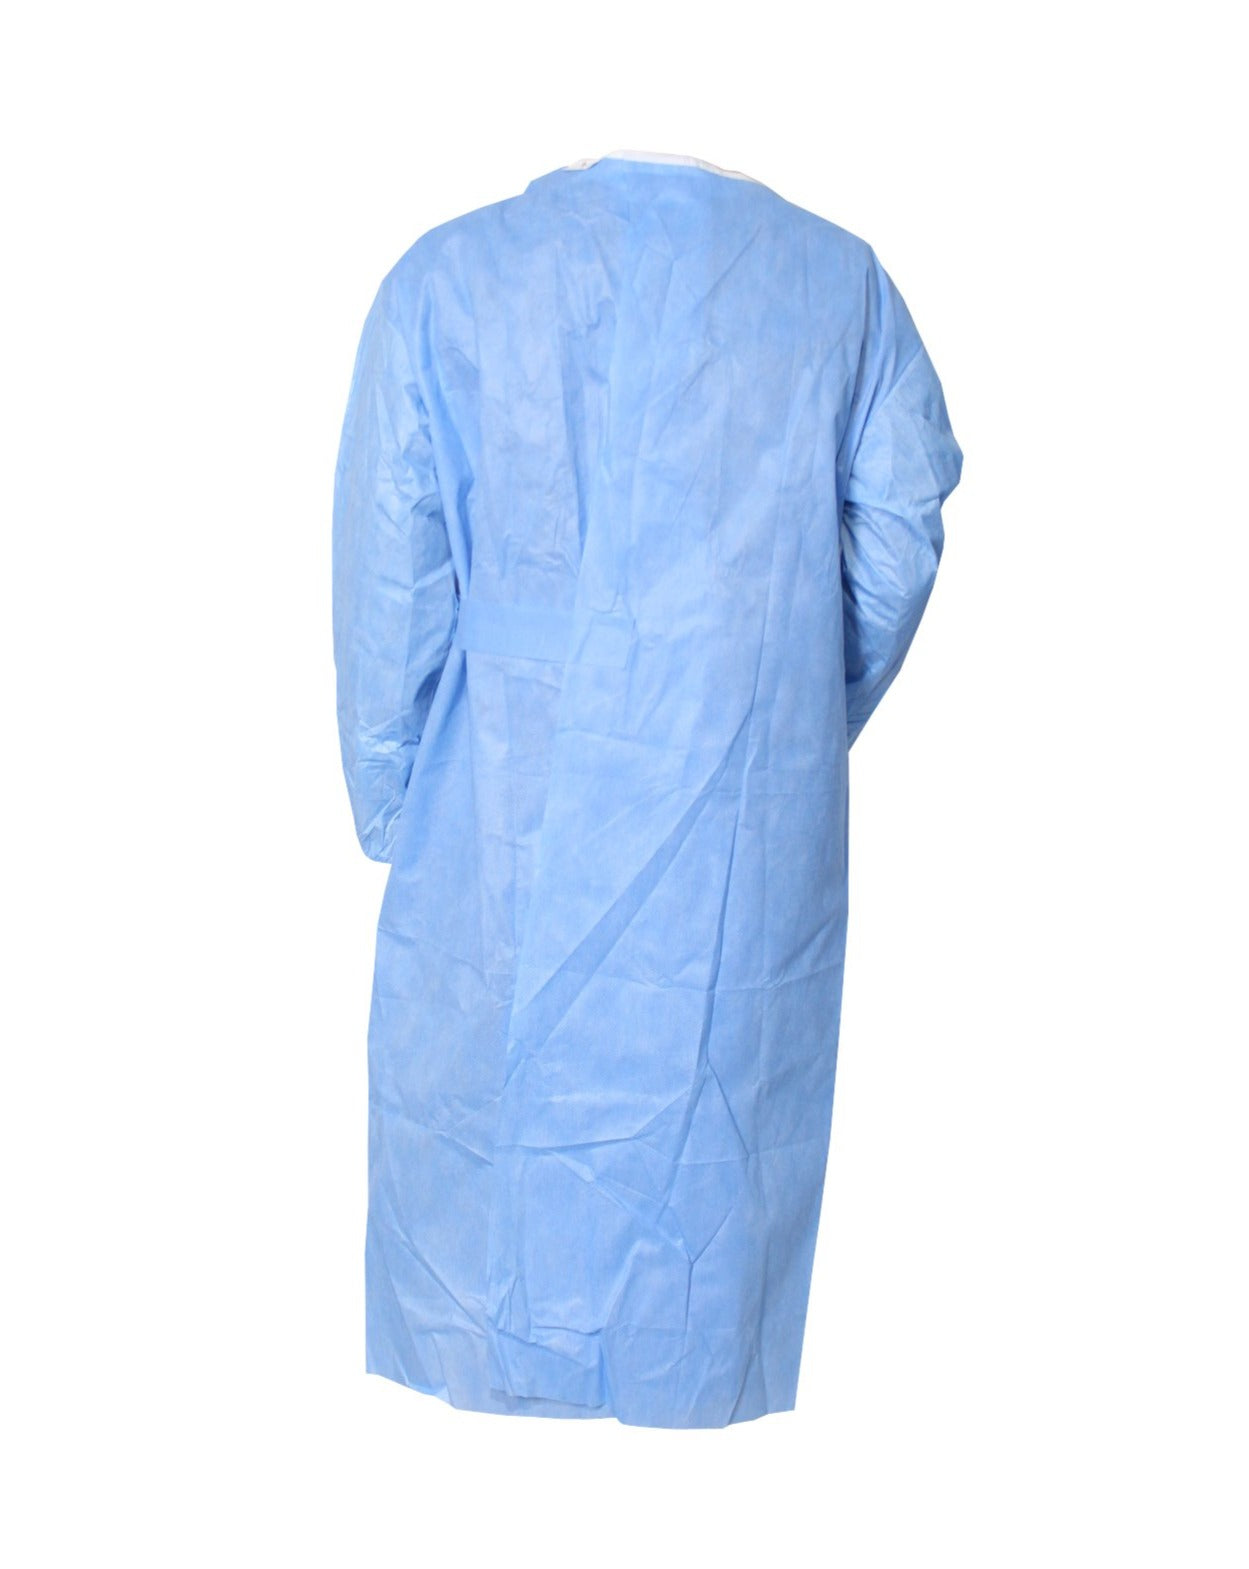 Sterile Standard Surgical Gown